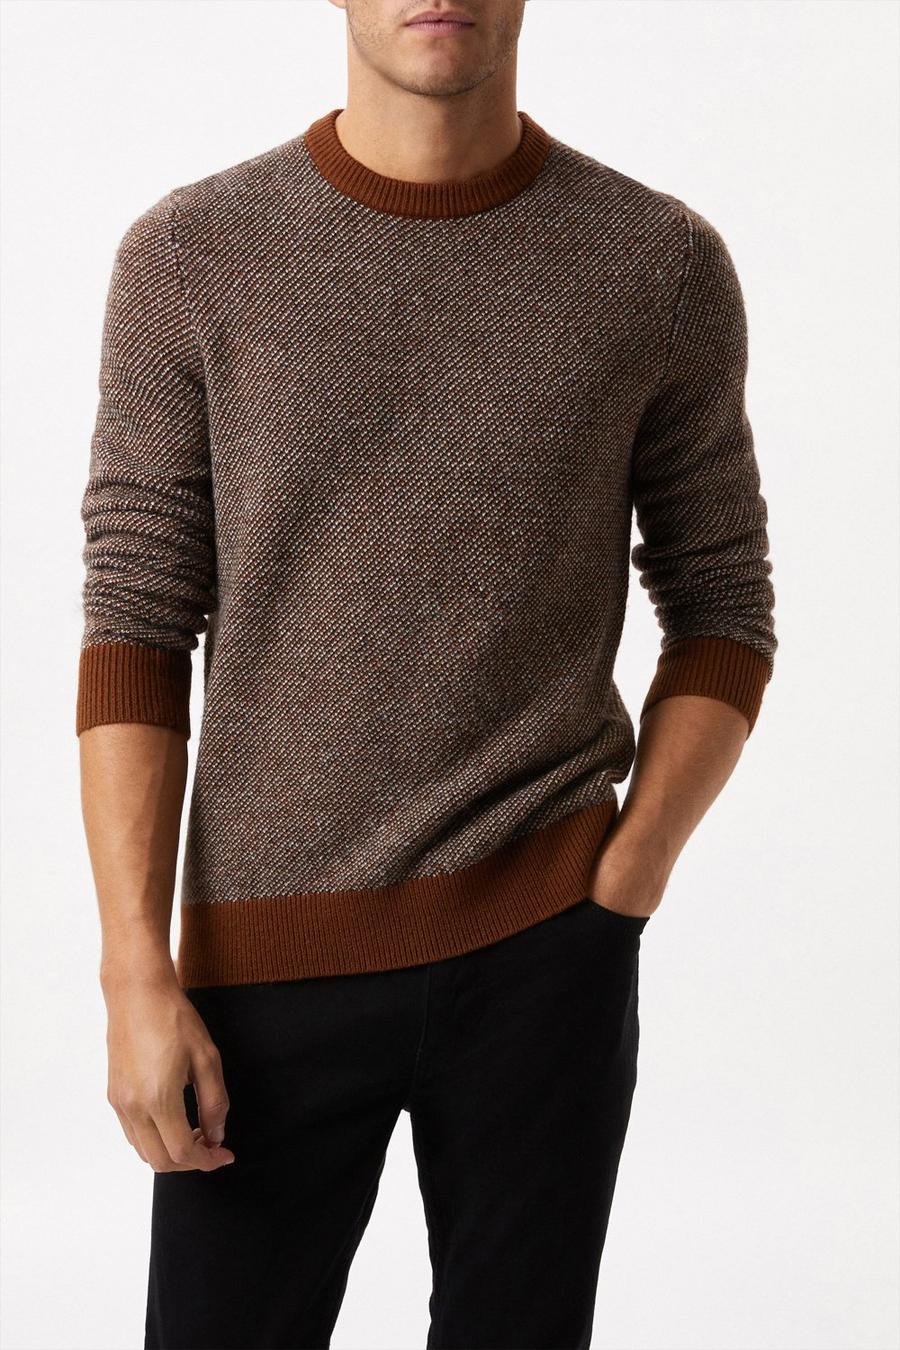 Super Soft Brown Two Tone Birdseye Knitted Jumper